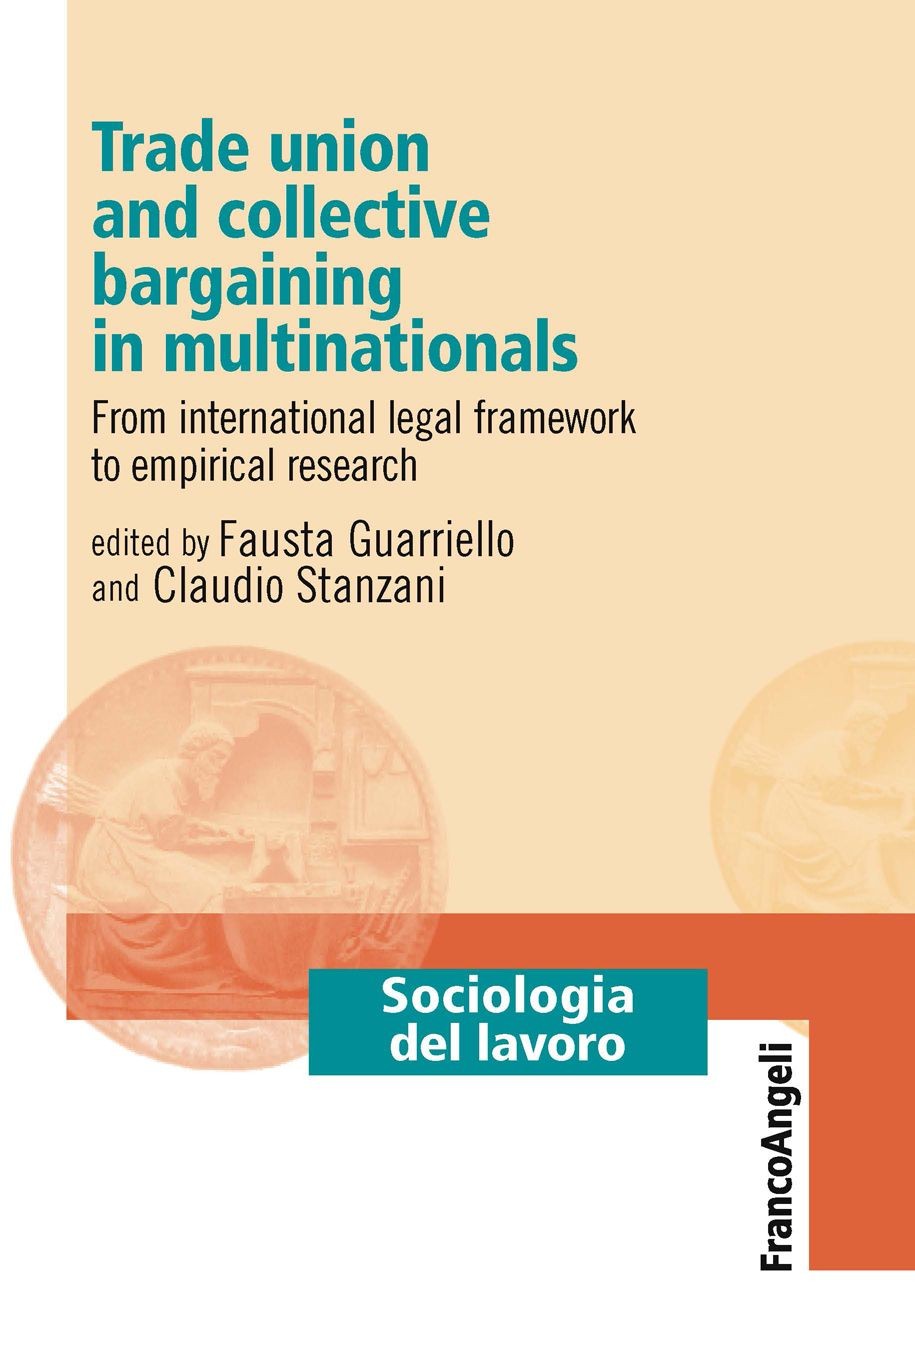 Trade union and collective bargaining in multinationals - Librerie.coop